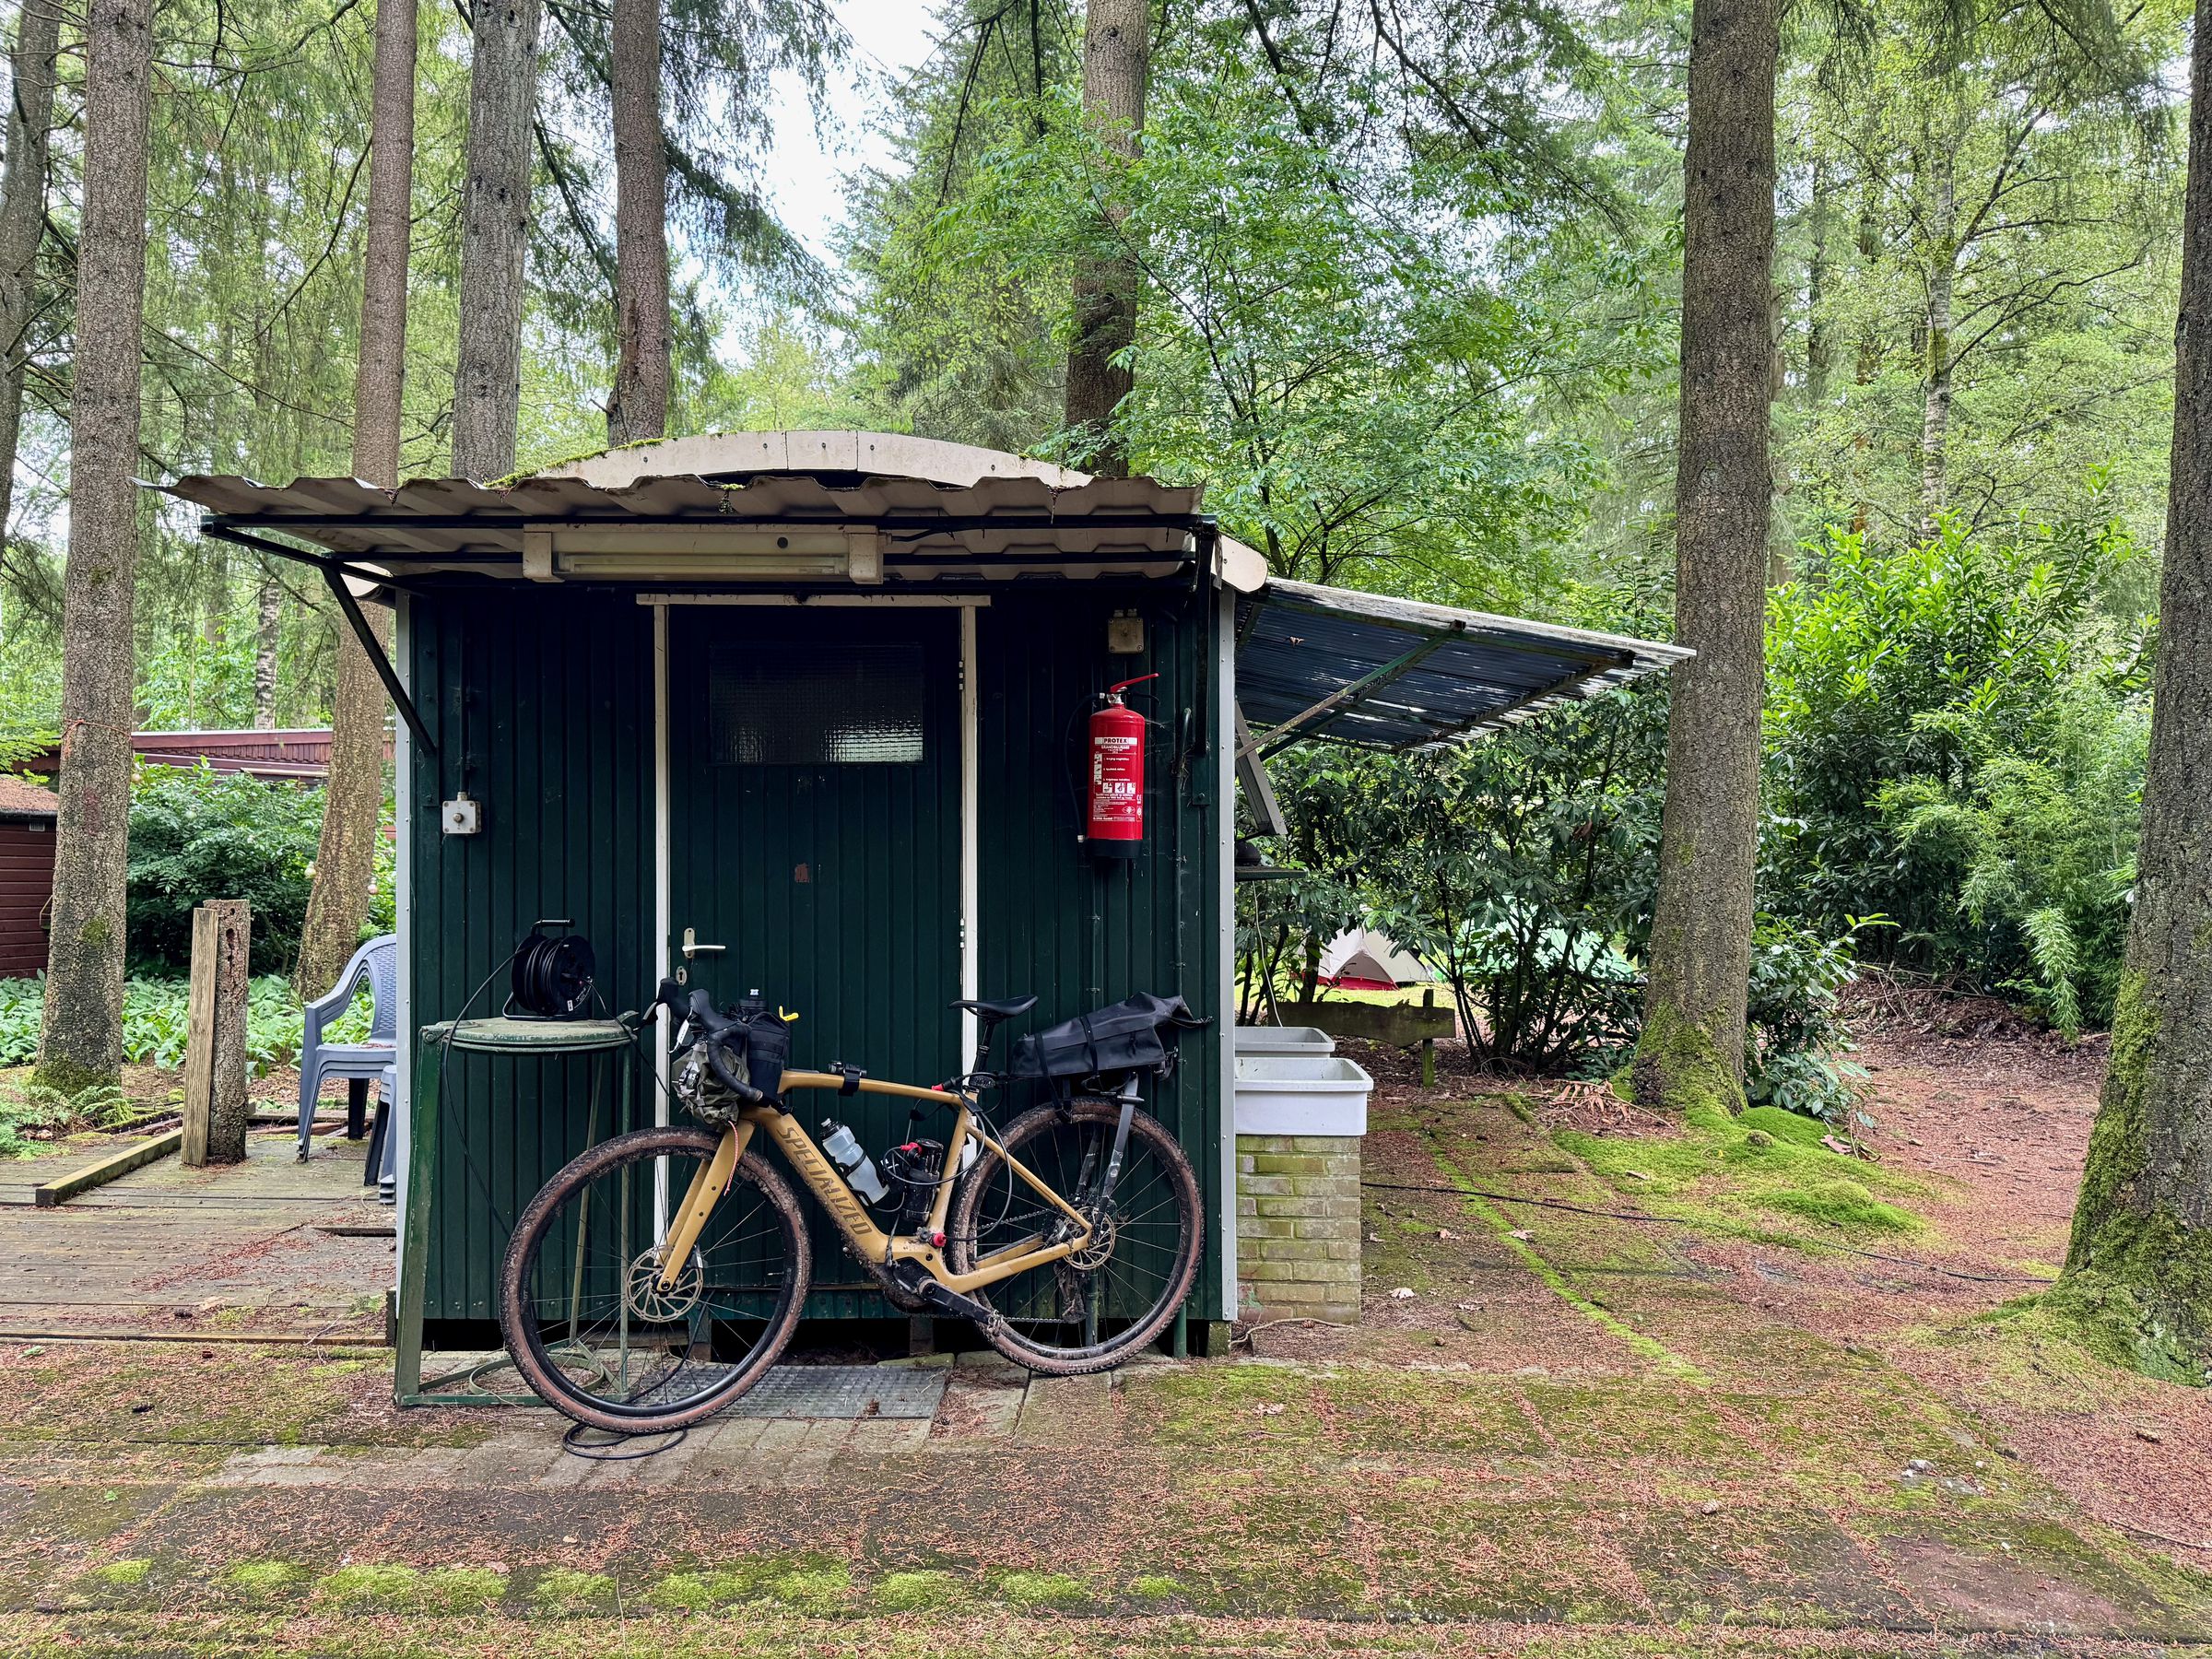 <em>This campsite ran an extension cord out from the shed to charge the e-bike. The overhang gave it some protection from the elements. You can see our tents directly behind the shed.</em>